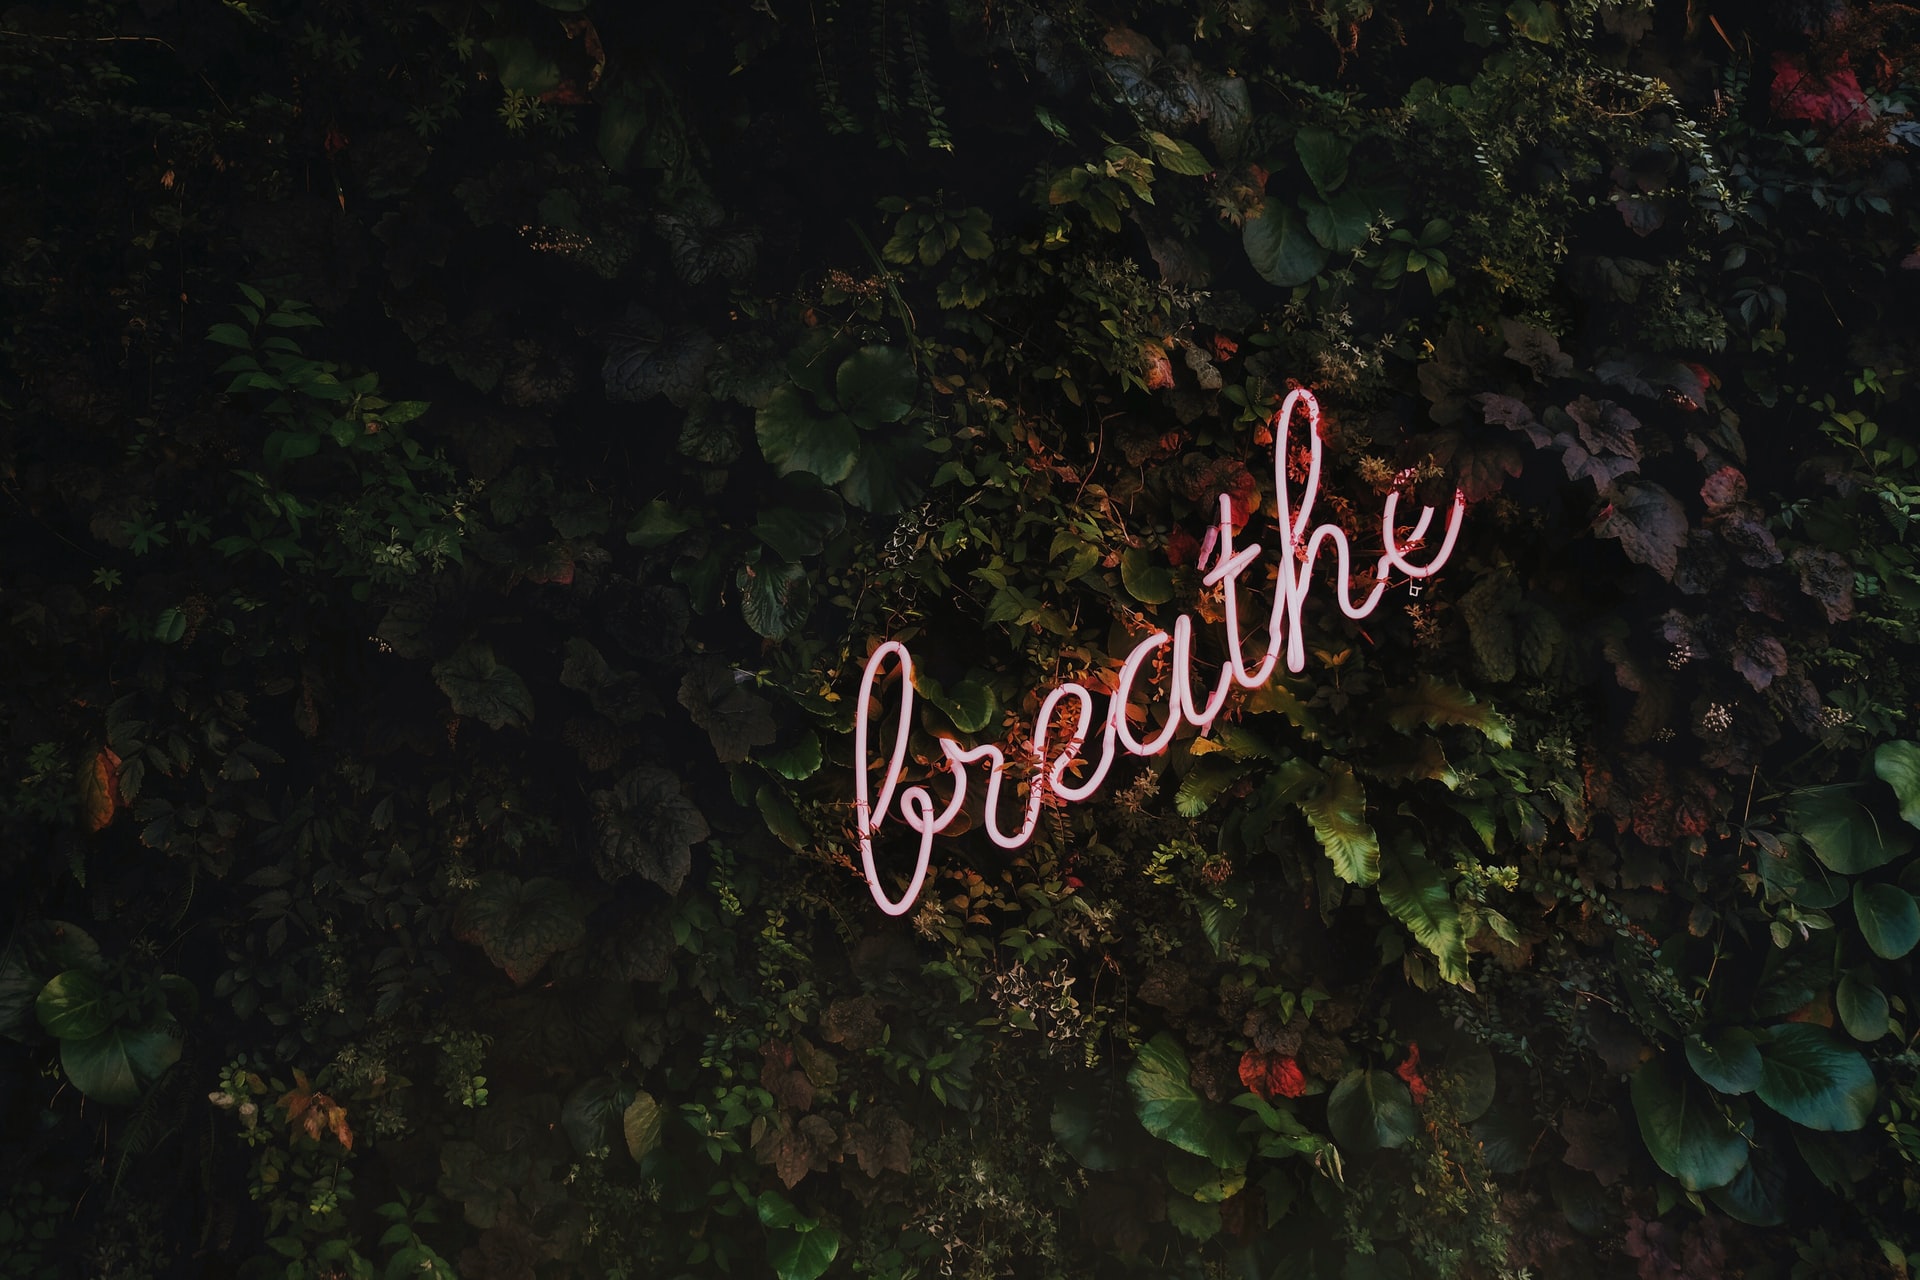 image-of-a-leafy-tree-with-a-light-up-sign-saying-breathe